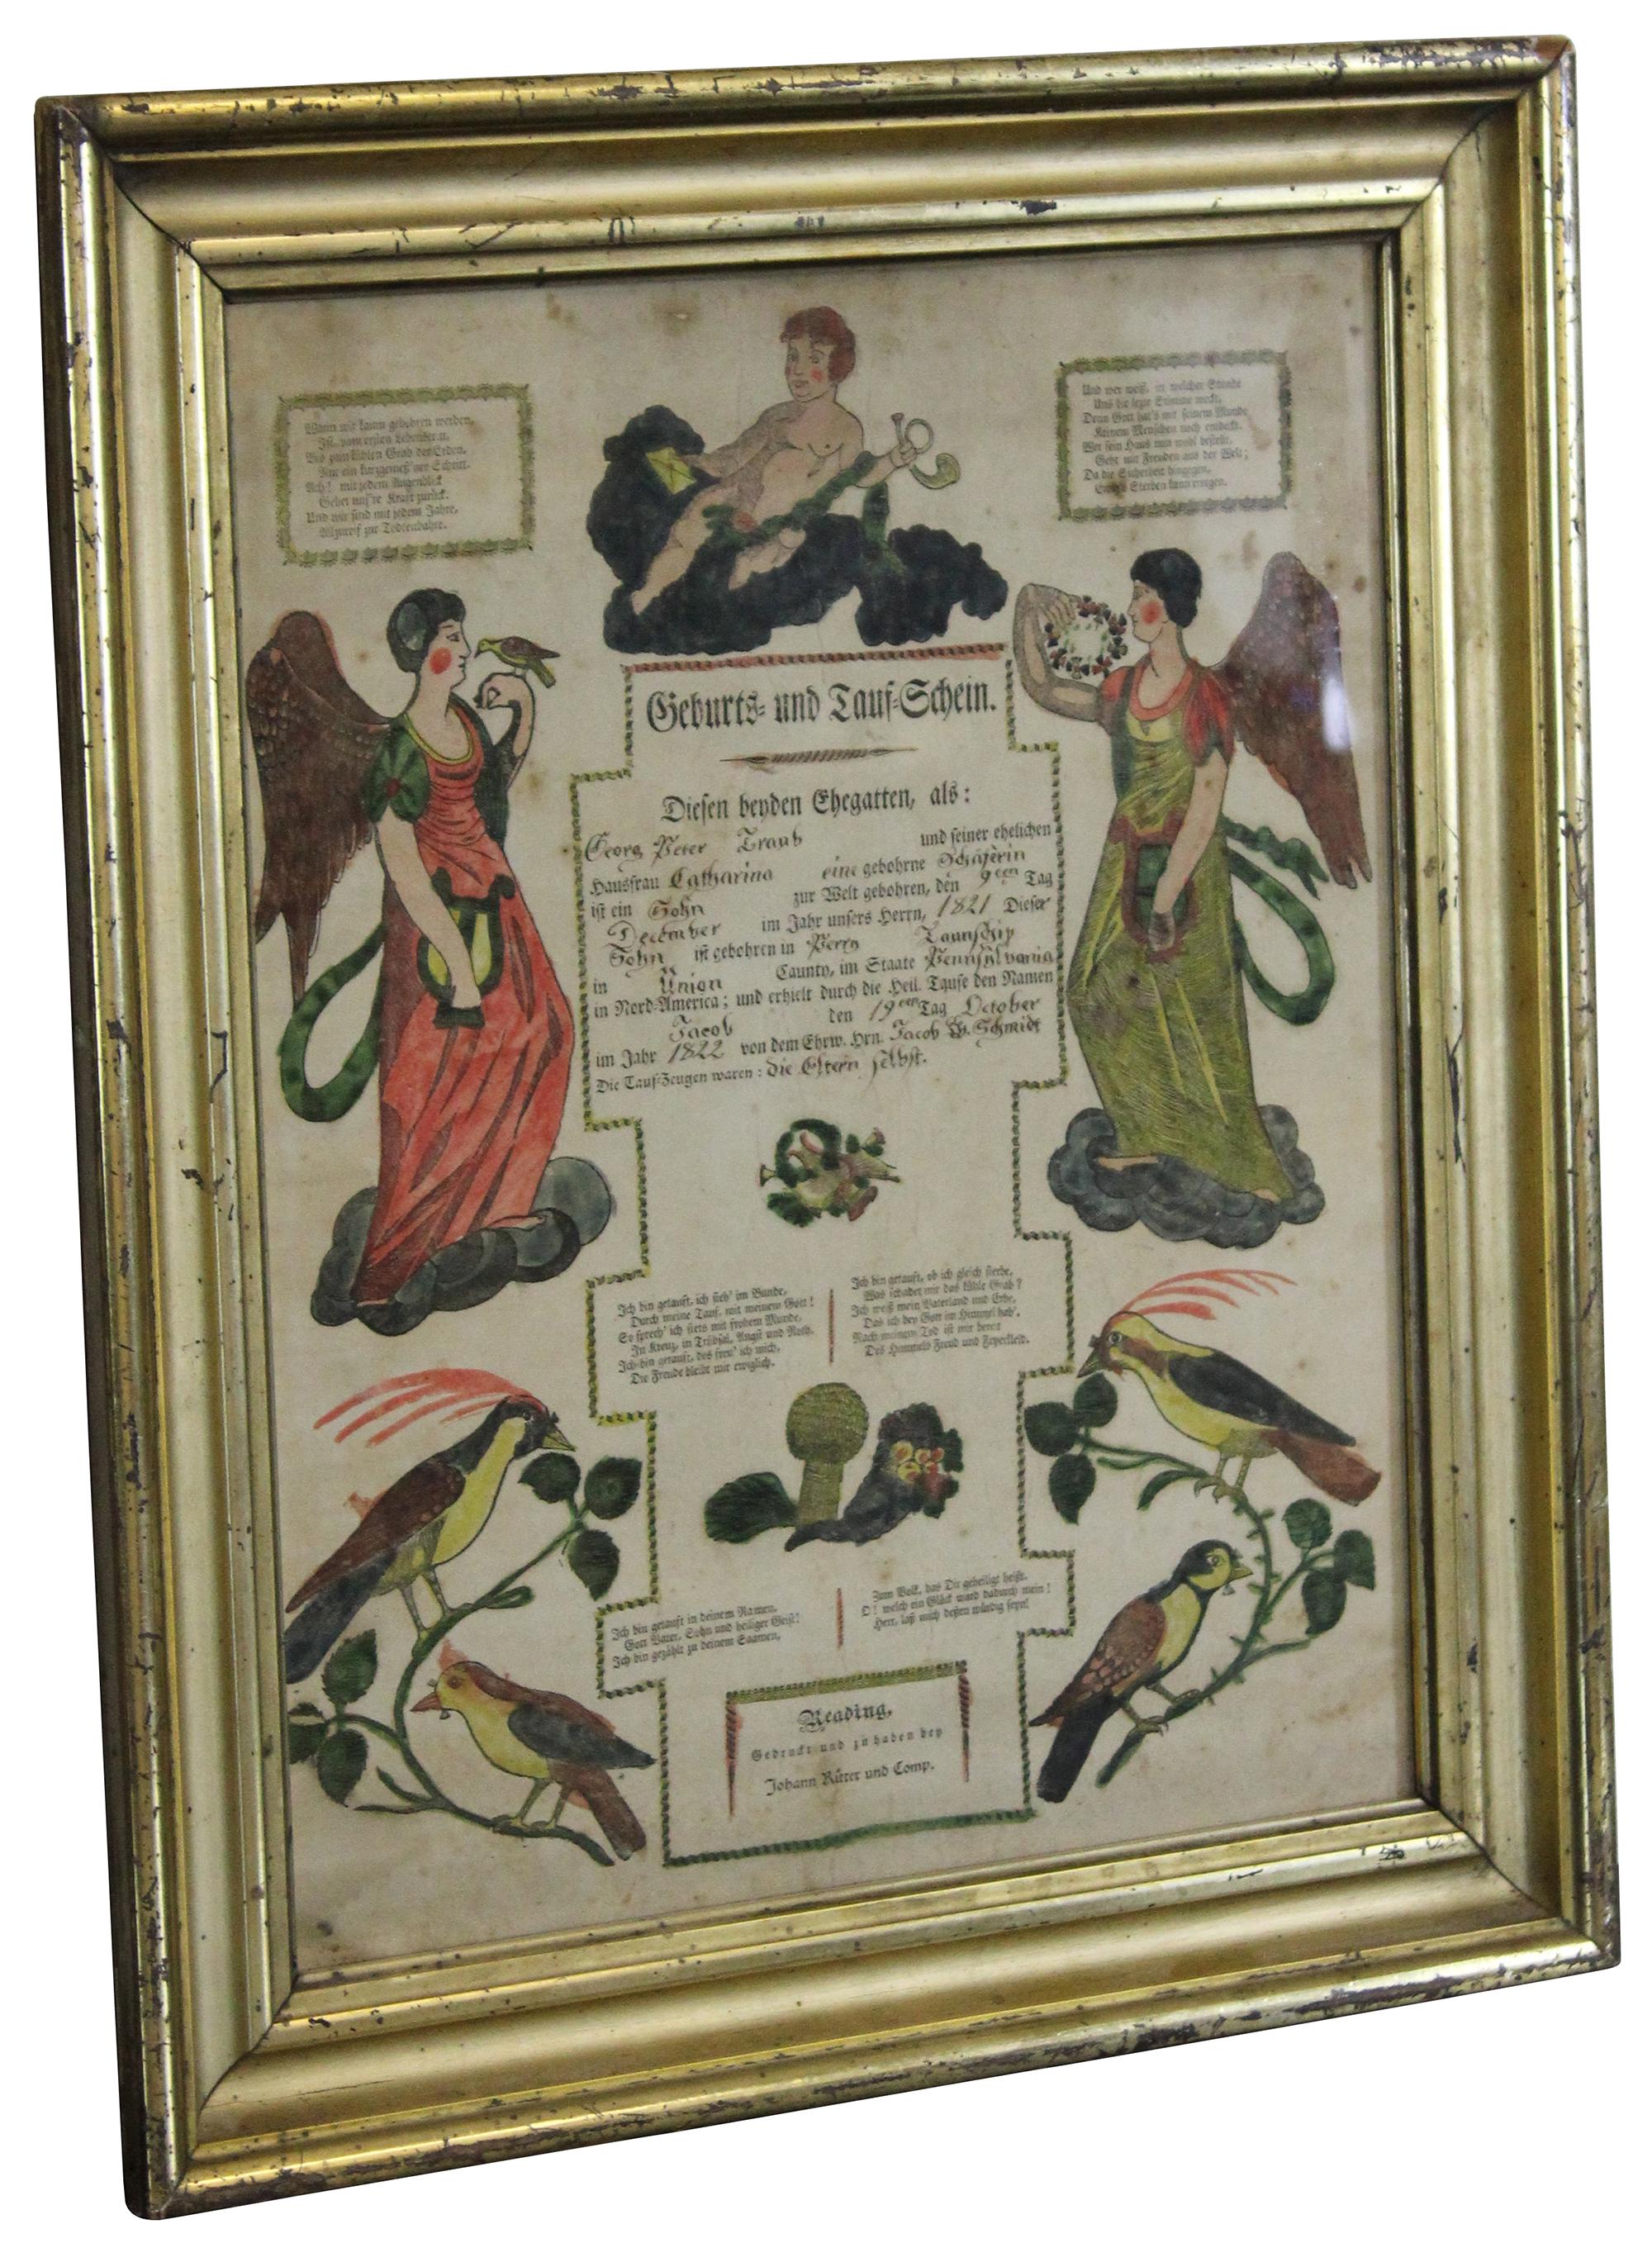 Antique 1822 German Birth and Baptism Certificate copper plate engraving by Johann Ritter & Company. Features a hand colored engraving with cherubs, angels, birds, harps and a poem. Signed 1821 / 1822.

Measures: Sans frame 16